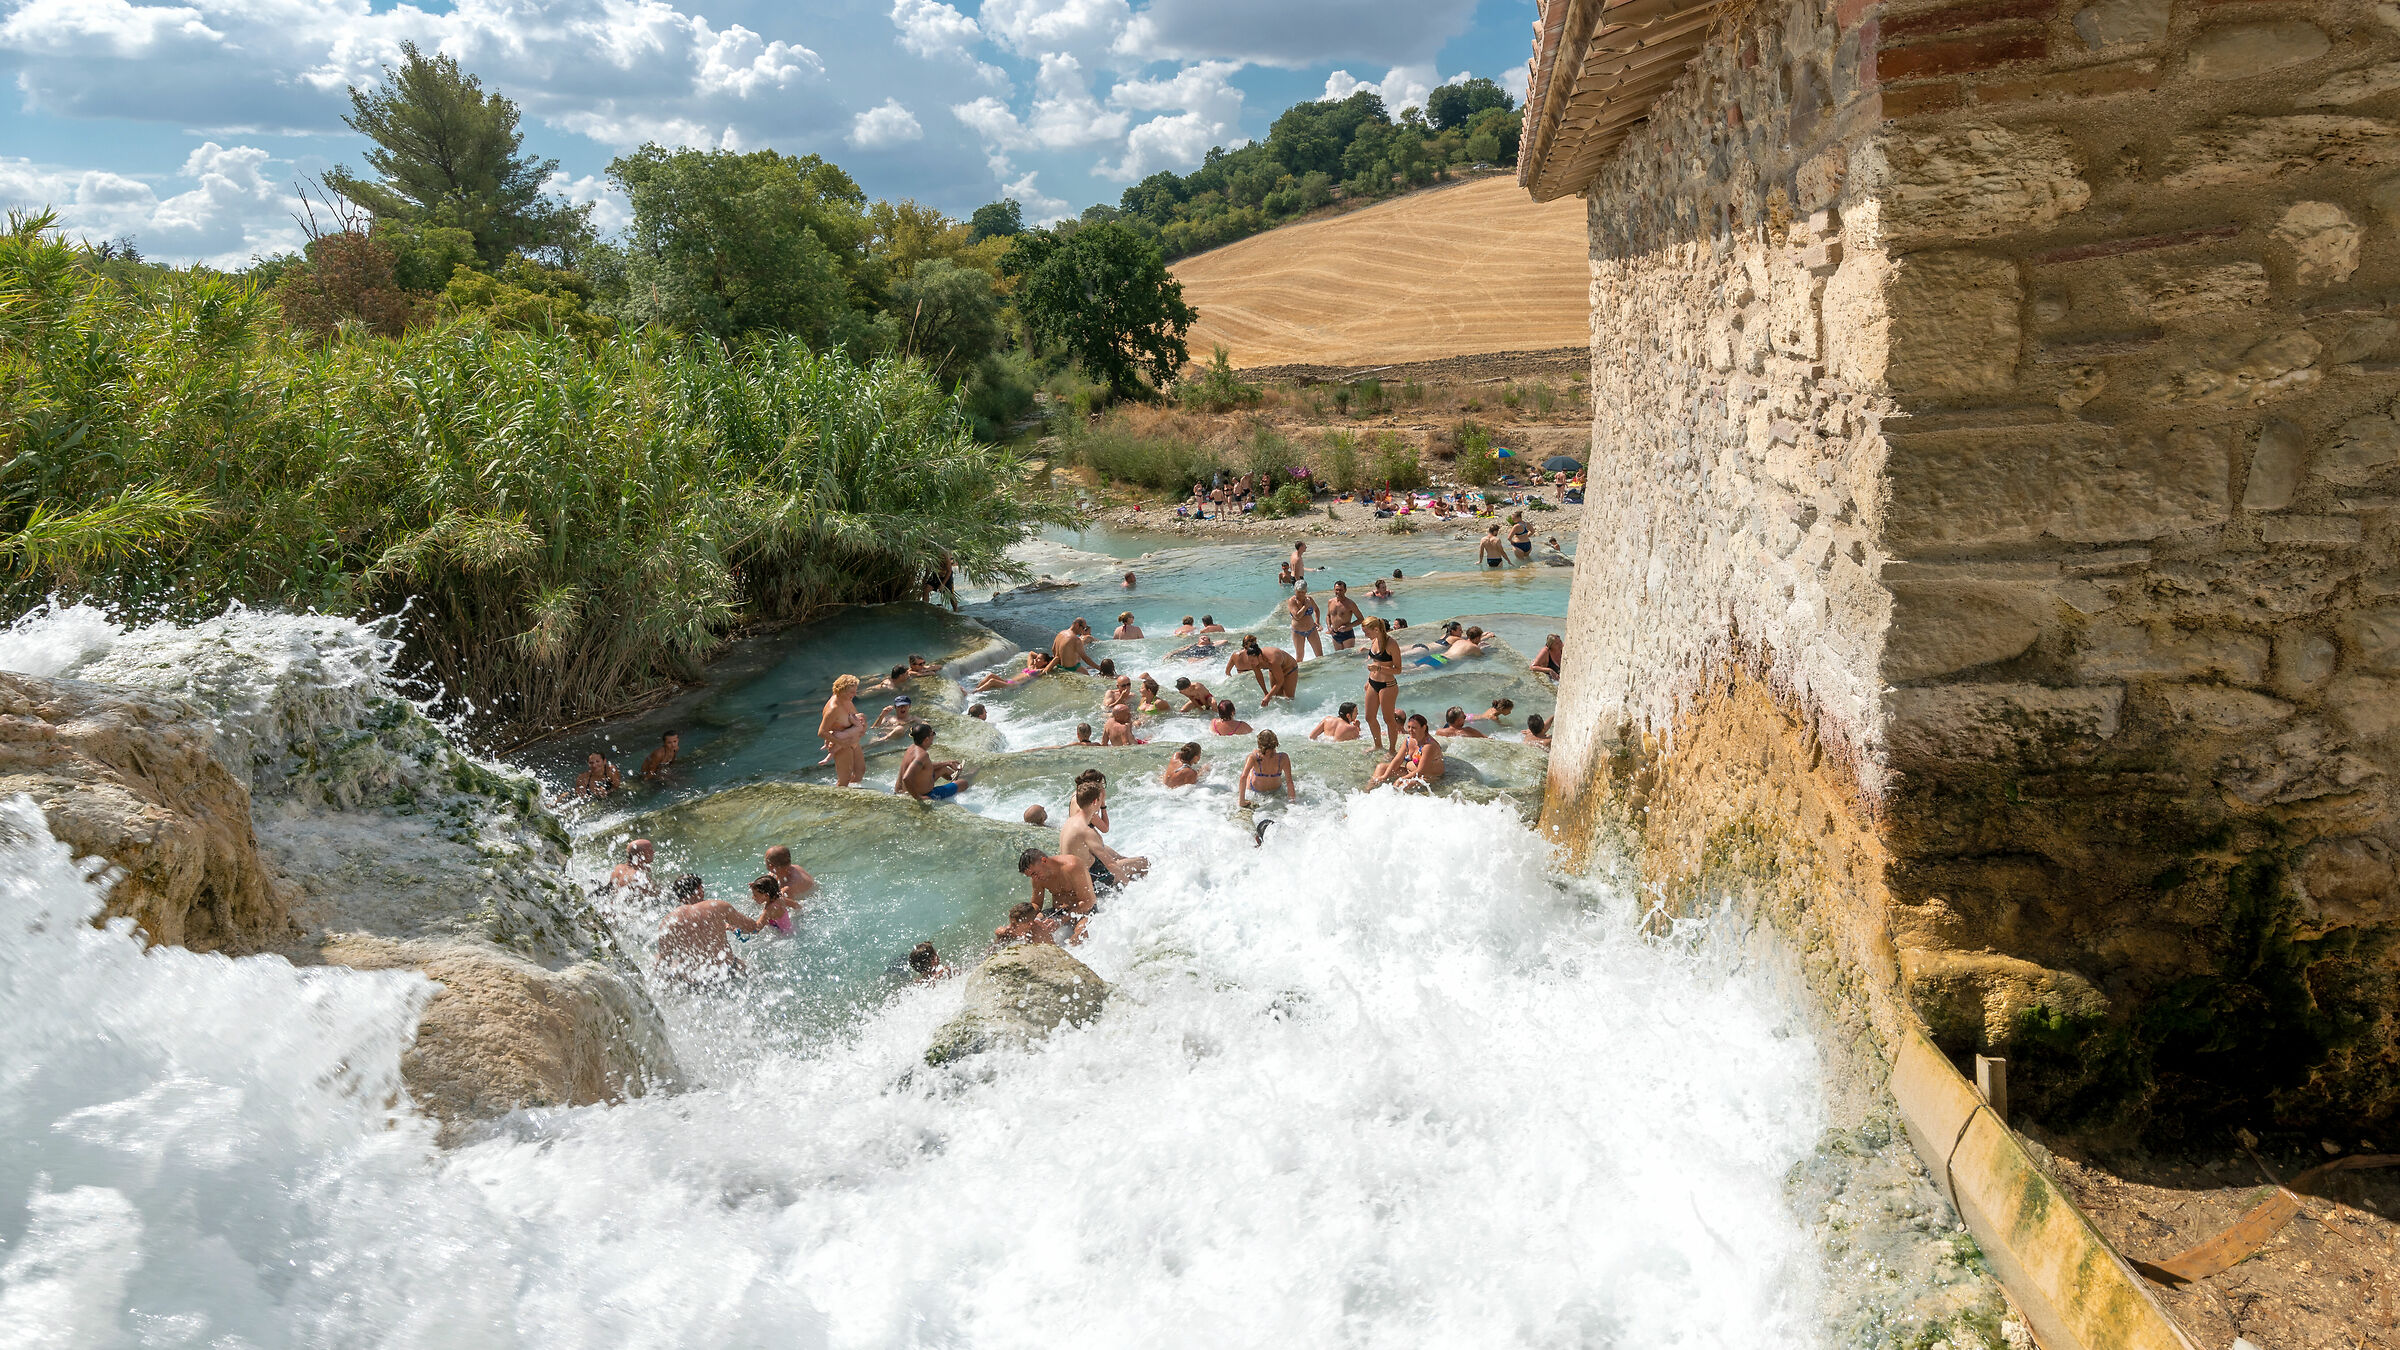 Baths of Saturnia - the descent...